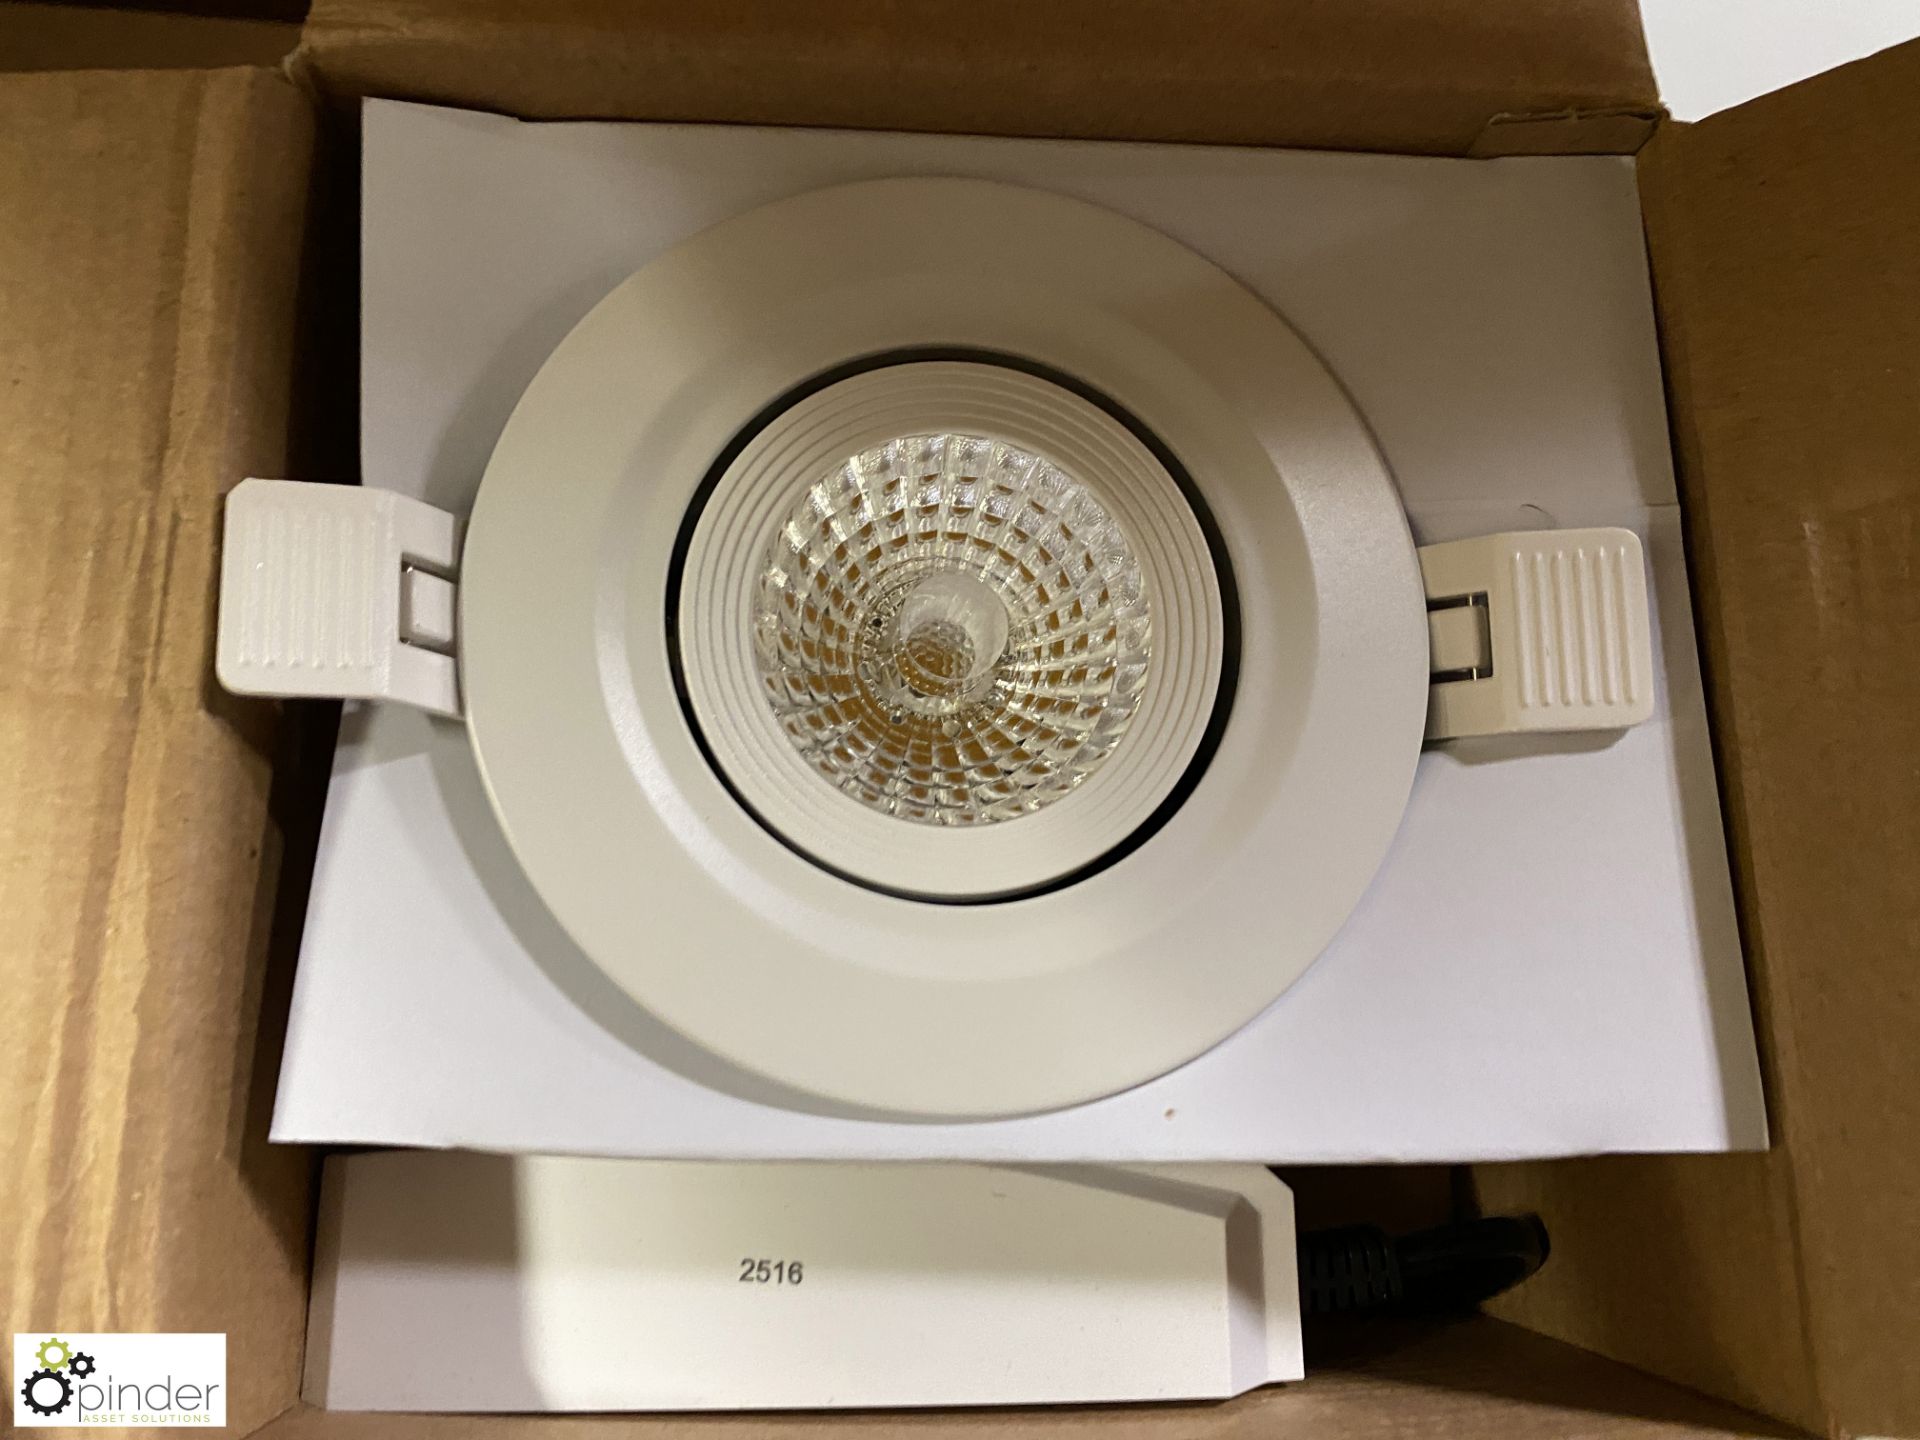 27 12w 1100LM LED Downlighters, product code T7GLB1100EZ